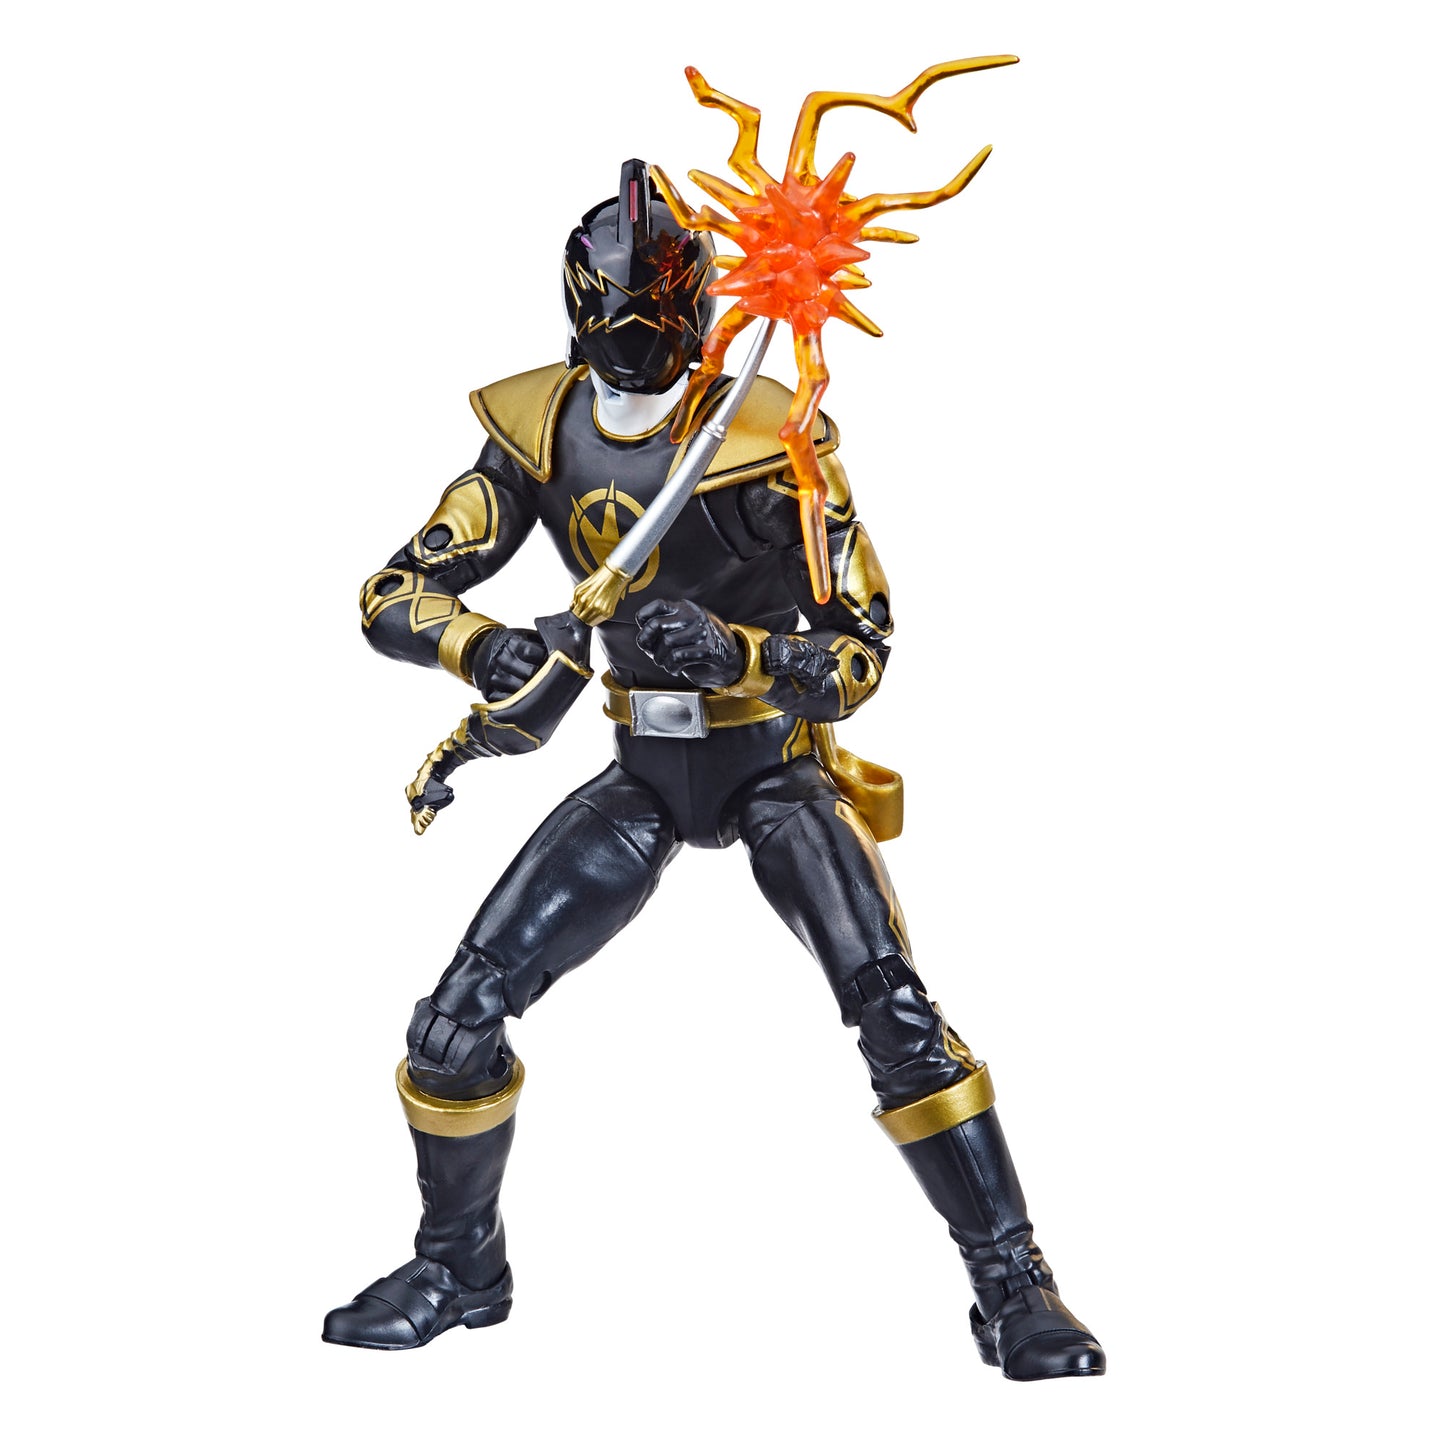 Power Rangers Lightning Collection Dino Thunder Black Ranger 6-Inch Premium Collectible Action Figure Toy with Accessories, Ages 4 and Up - Heretoserveyou 